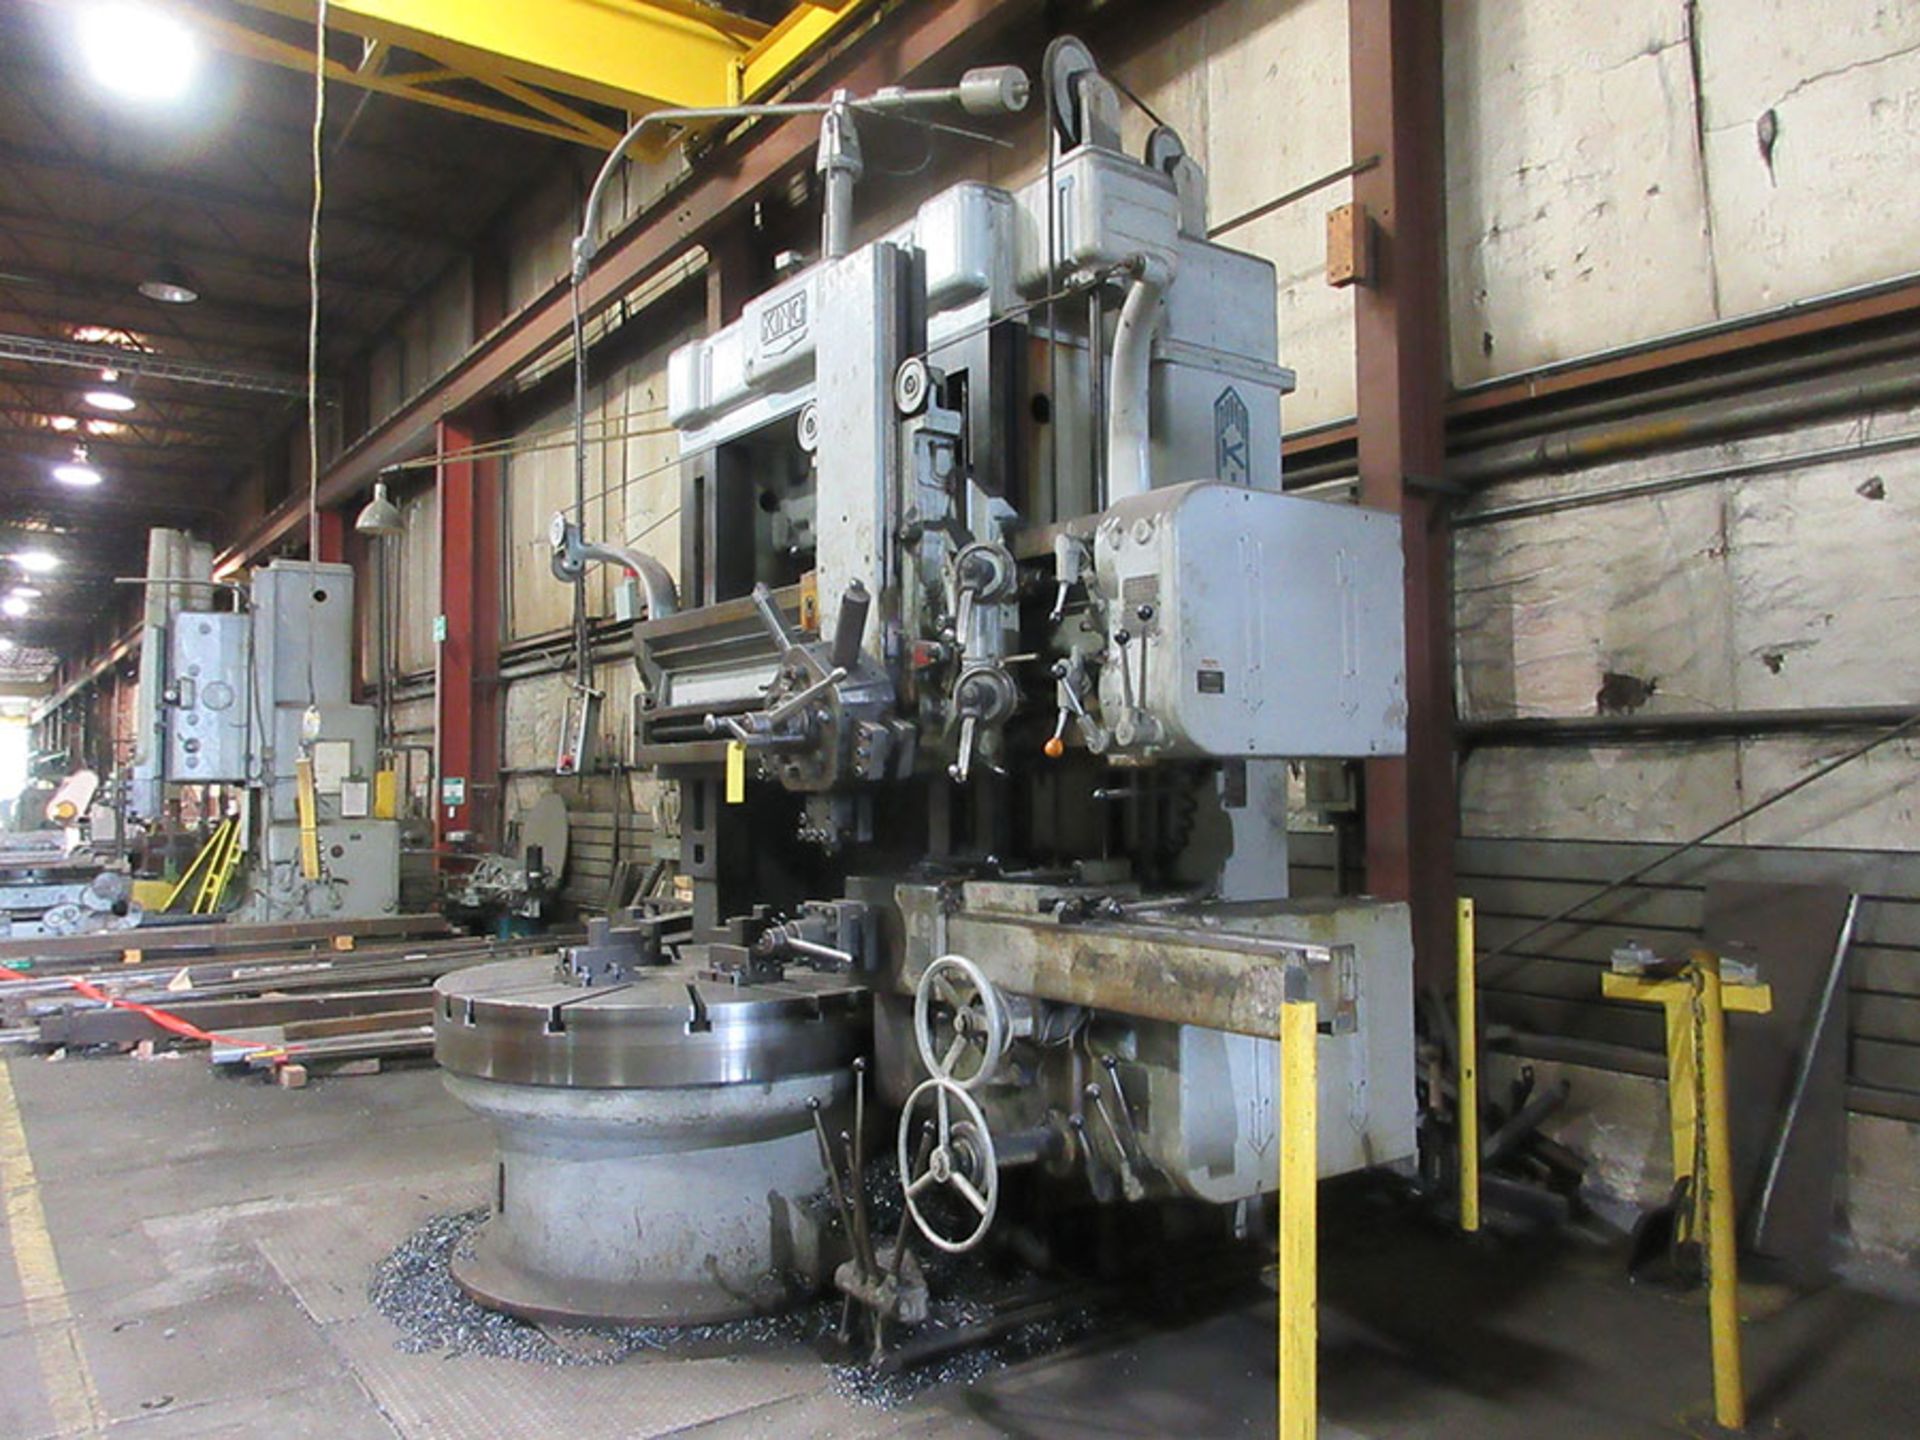 KING VERTICAL TURRET LATHE; 62'' DIA. BED, 5-TOOL POSITION HOLDER, 2.3-75 RPM, S/N 29171 - Image 2 of 3